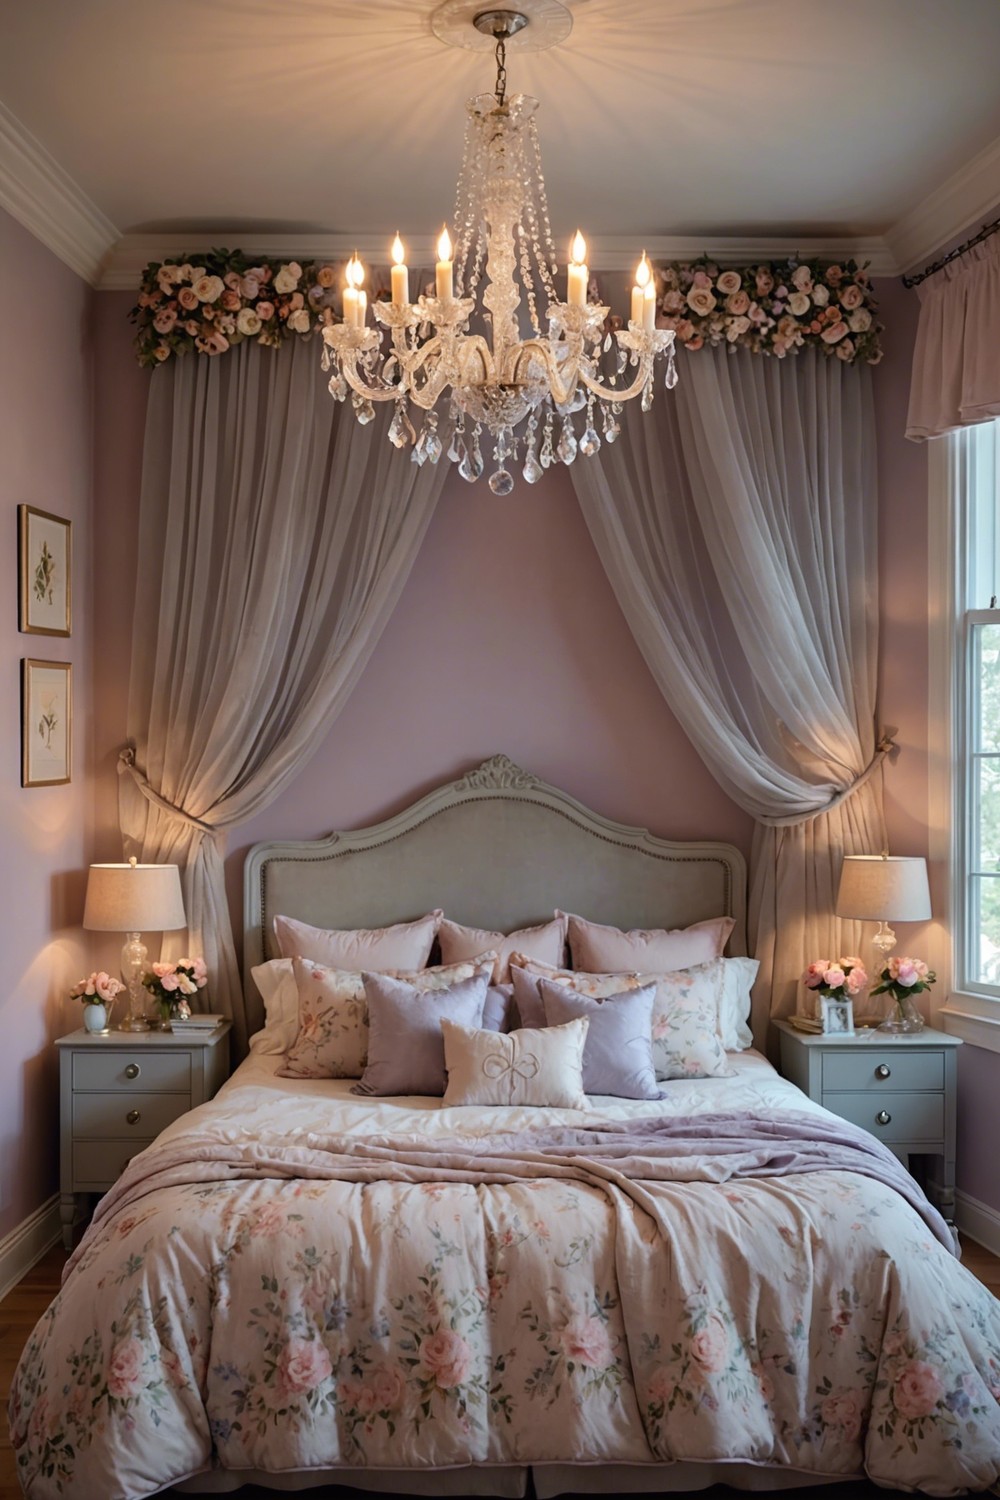 Whimsical Oasis: Floral Patterns and Dreamy Lighting